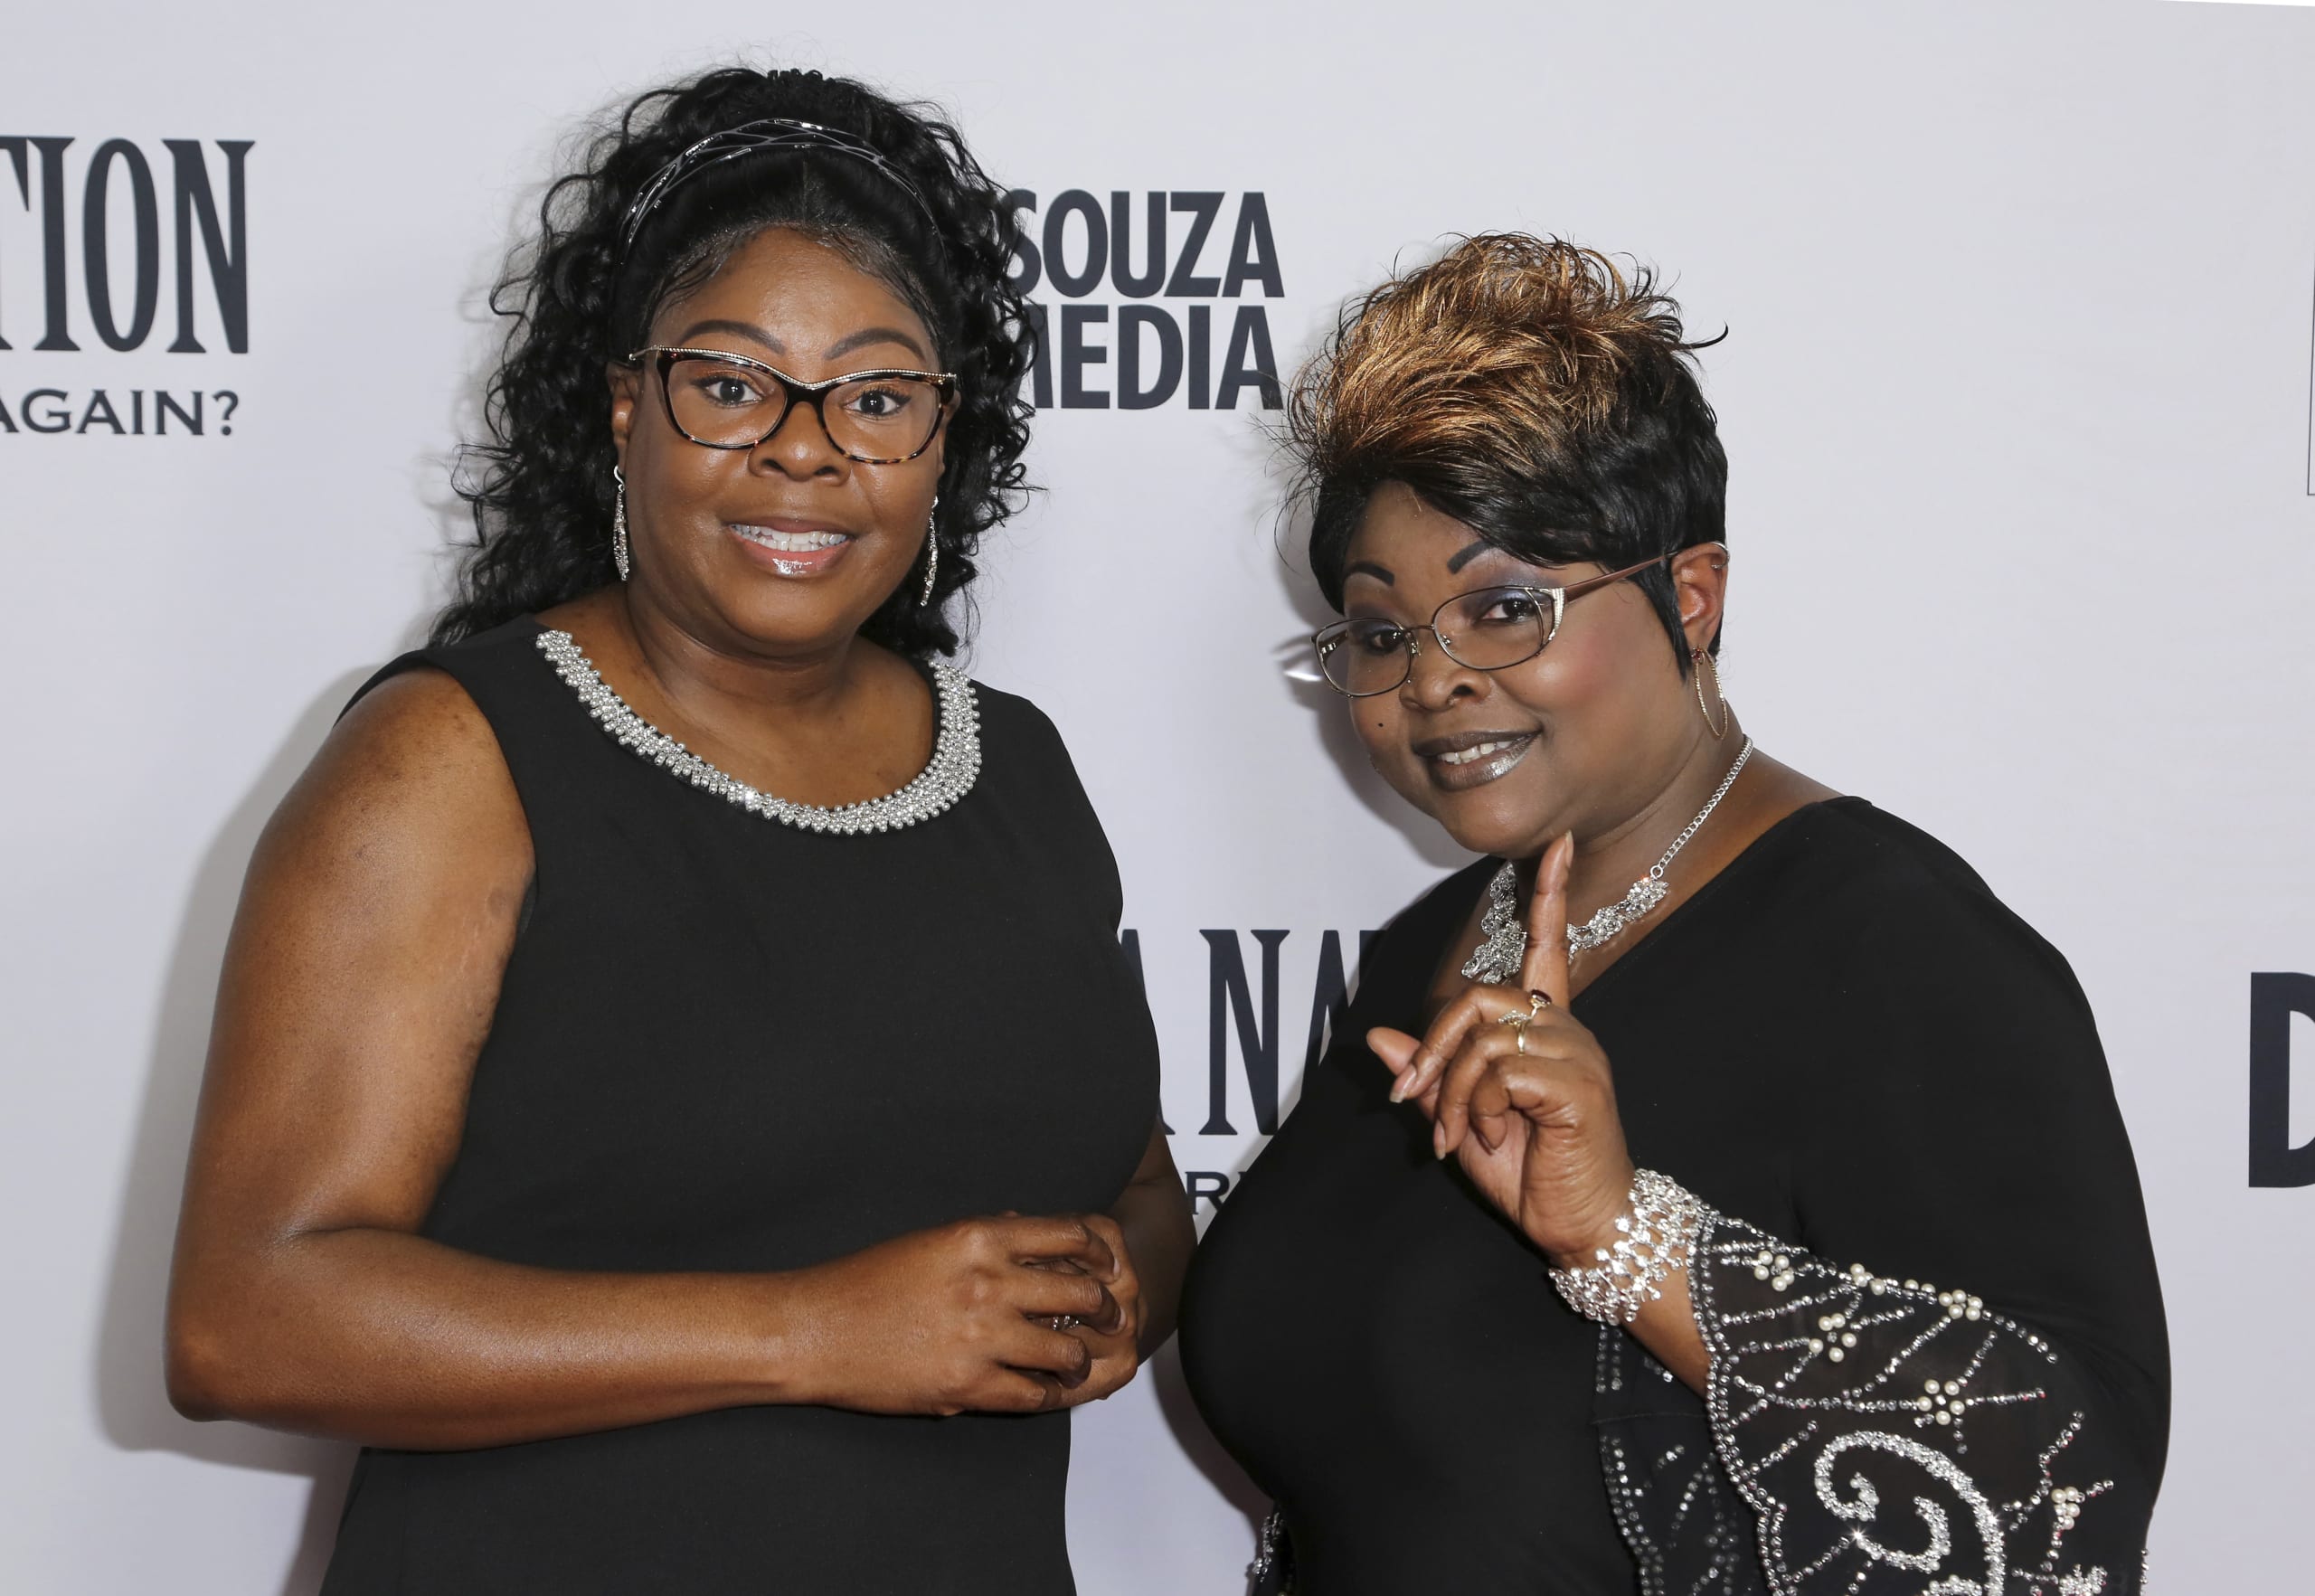 ‘Diamond,’ of Diamond and Silk, died from heart disease from chronic high blood pressure, report says